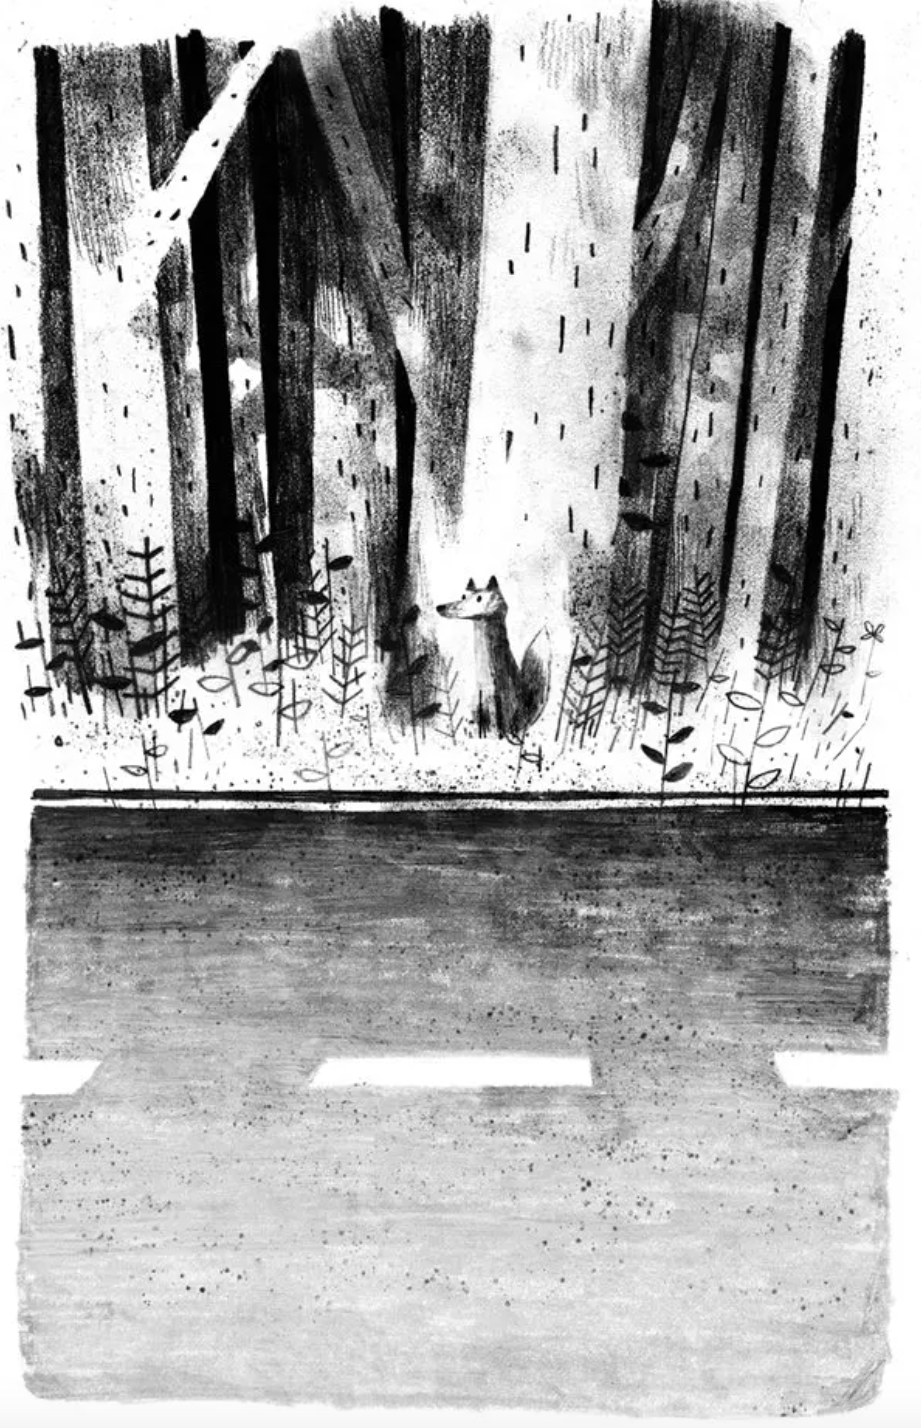 Pax on his own by the side of the road. Illustration by John Klassen in Pax by Sara Pennypacker. 